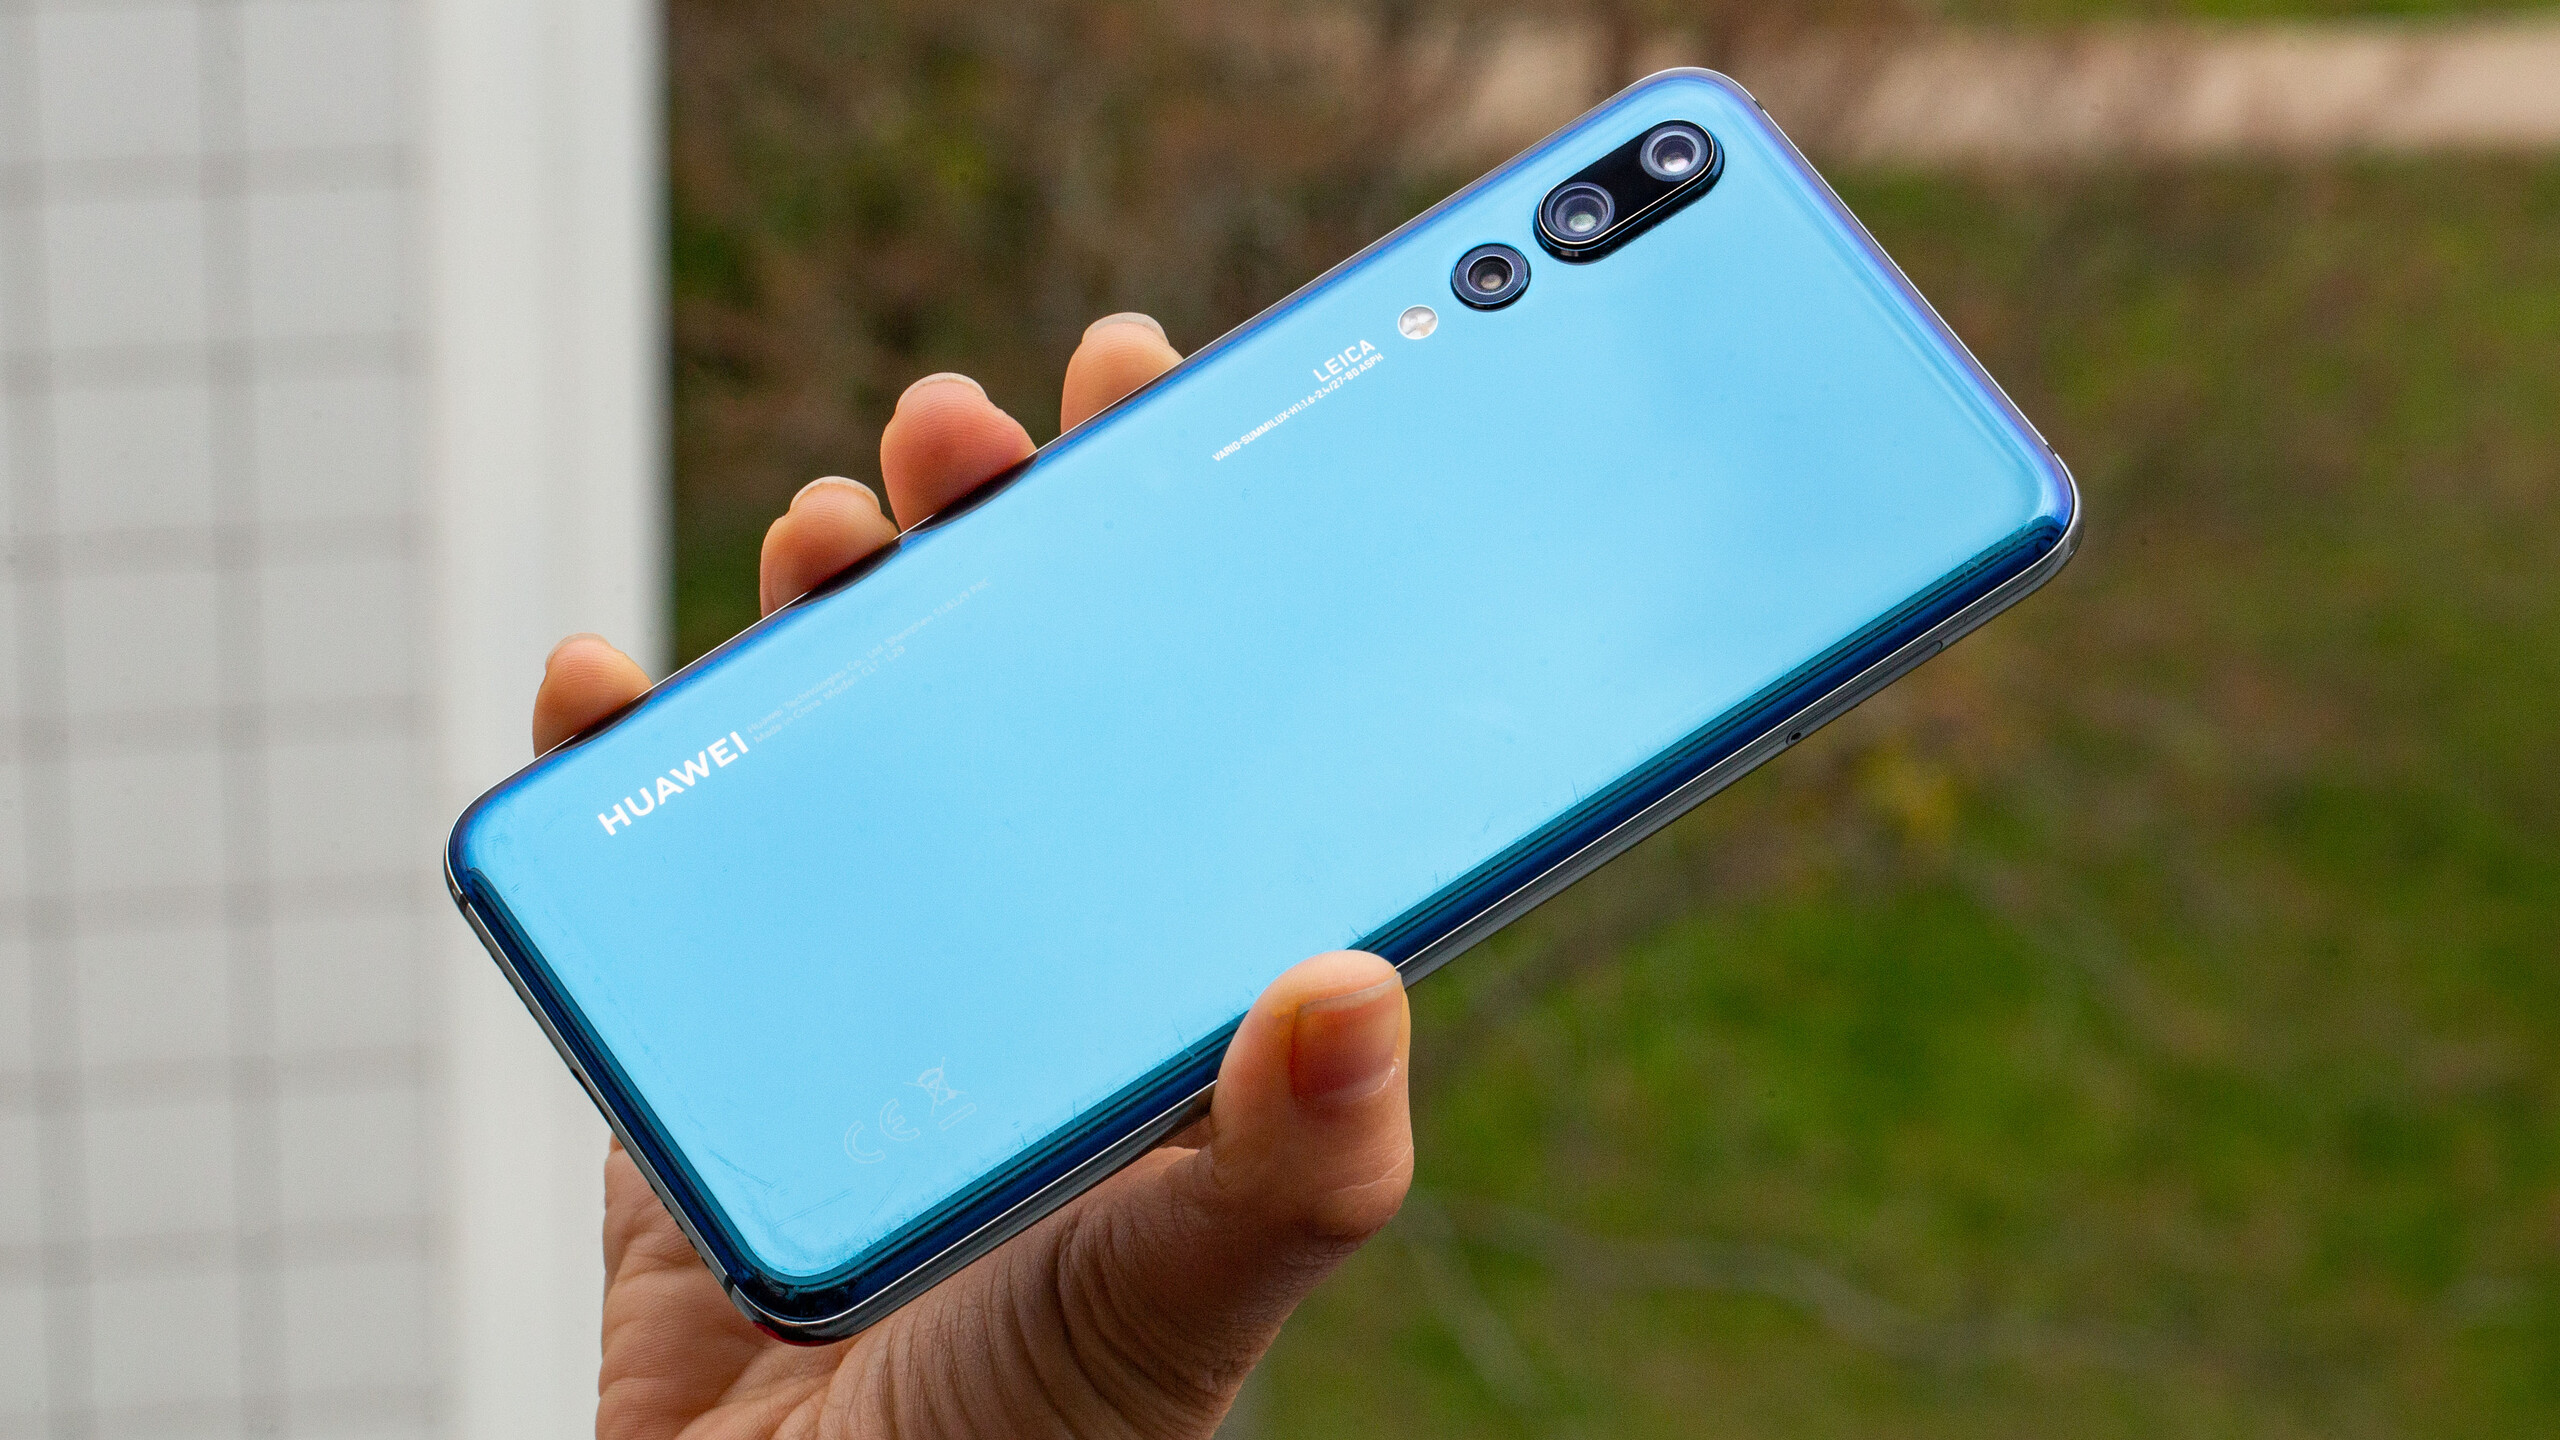 The P20 Pro and P20 join the Mate 10 Pro outside Huawei's security update - NotebookCheck.net